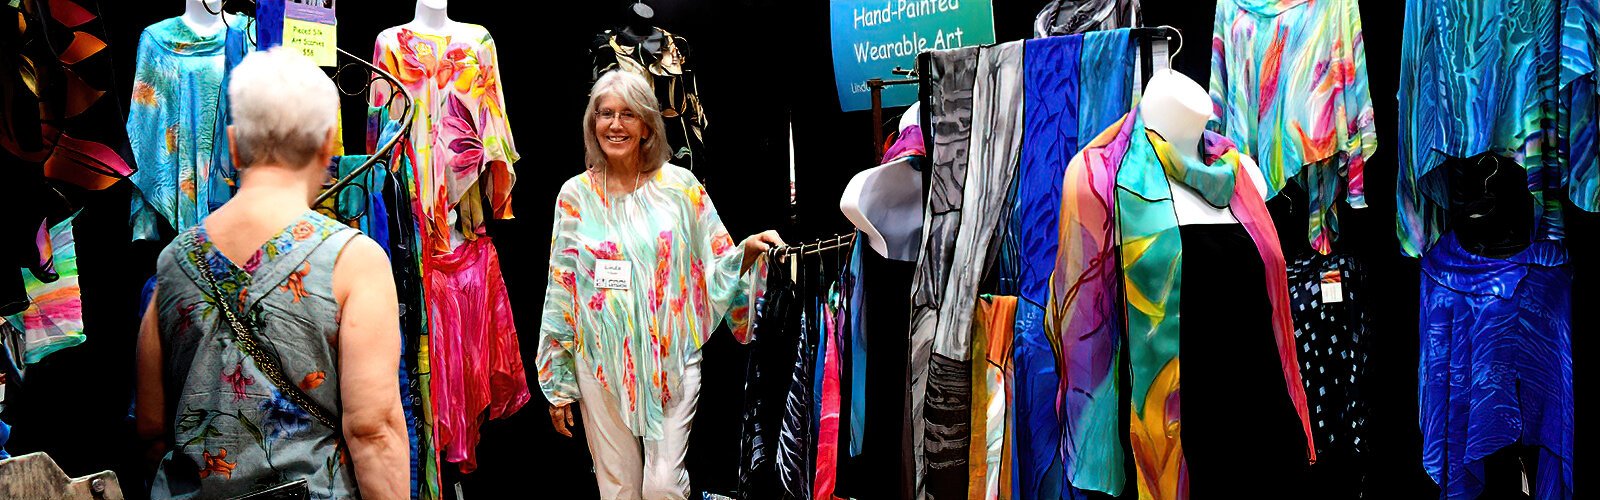 Textile artist Linda Tilson, who teaches various classes at the Venice Art Center, displays her one-of-a-kind hand-painted vibrant silk creations that are functional, wearable pieces of art.